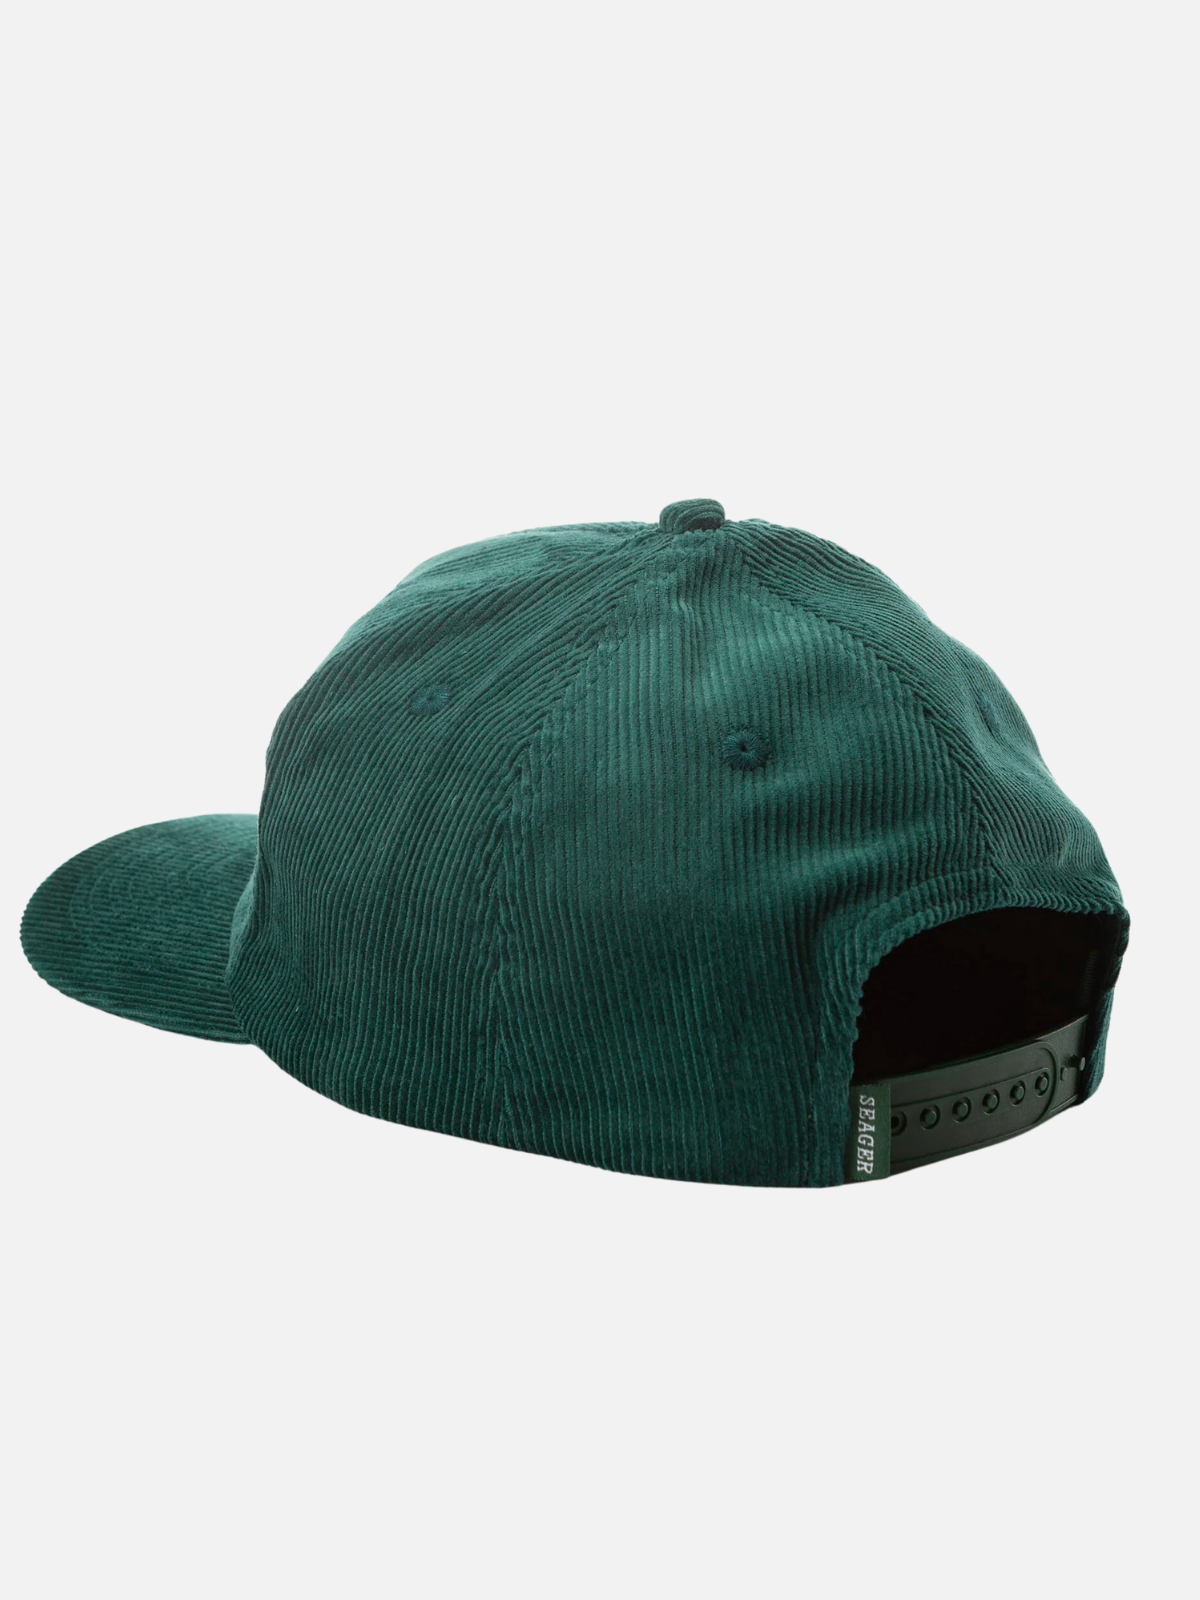 seager trip cotton corduroy snapback hat green embroidered patch kempt athens ga georgia men's clothing store